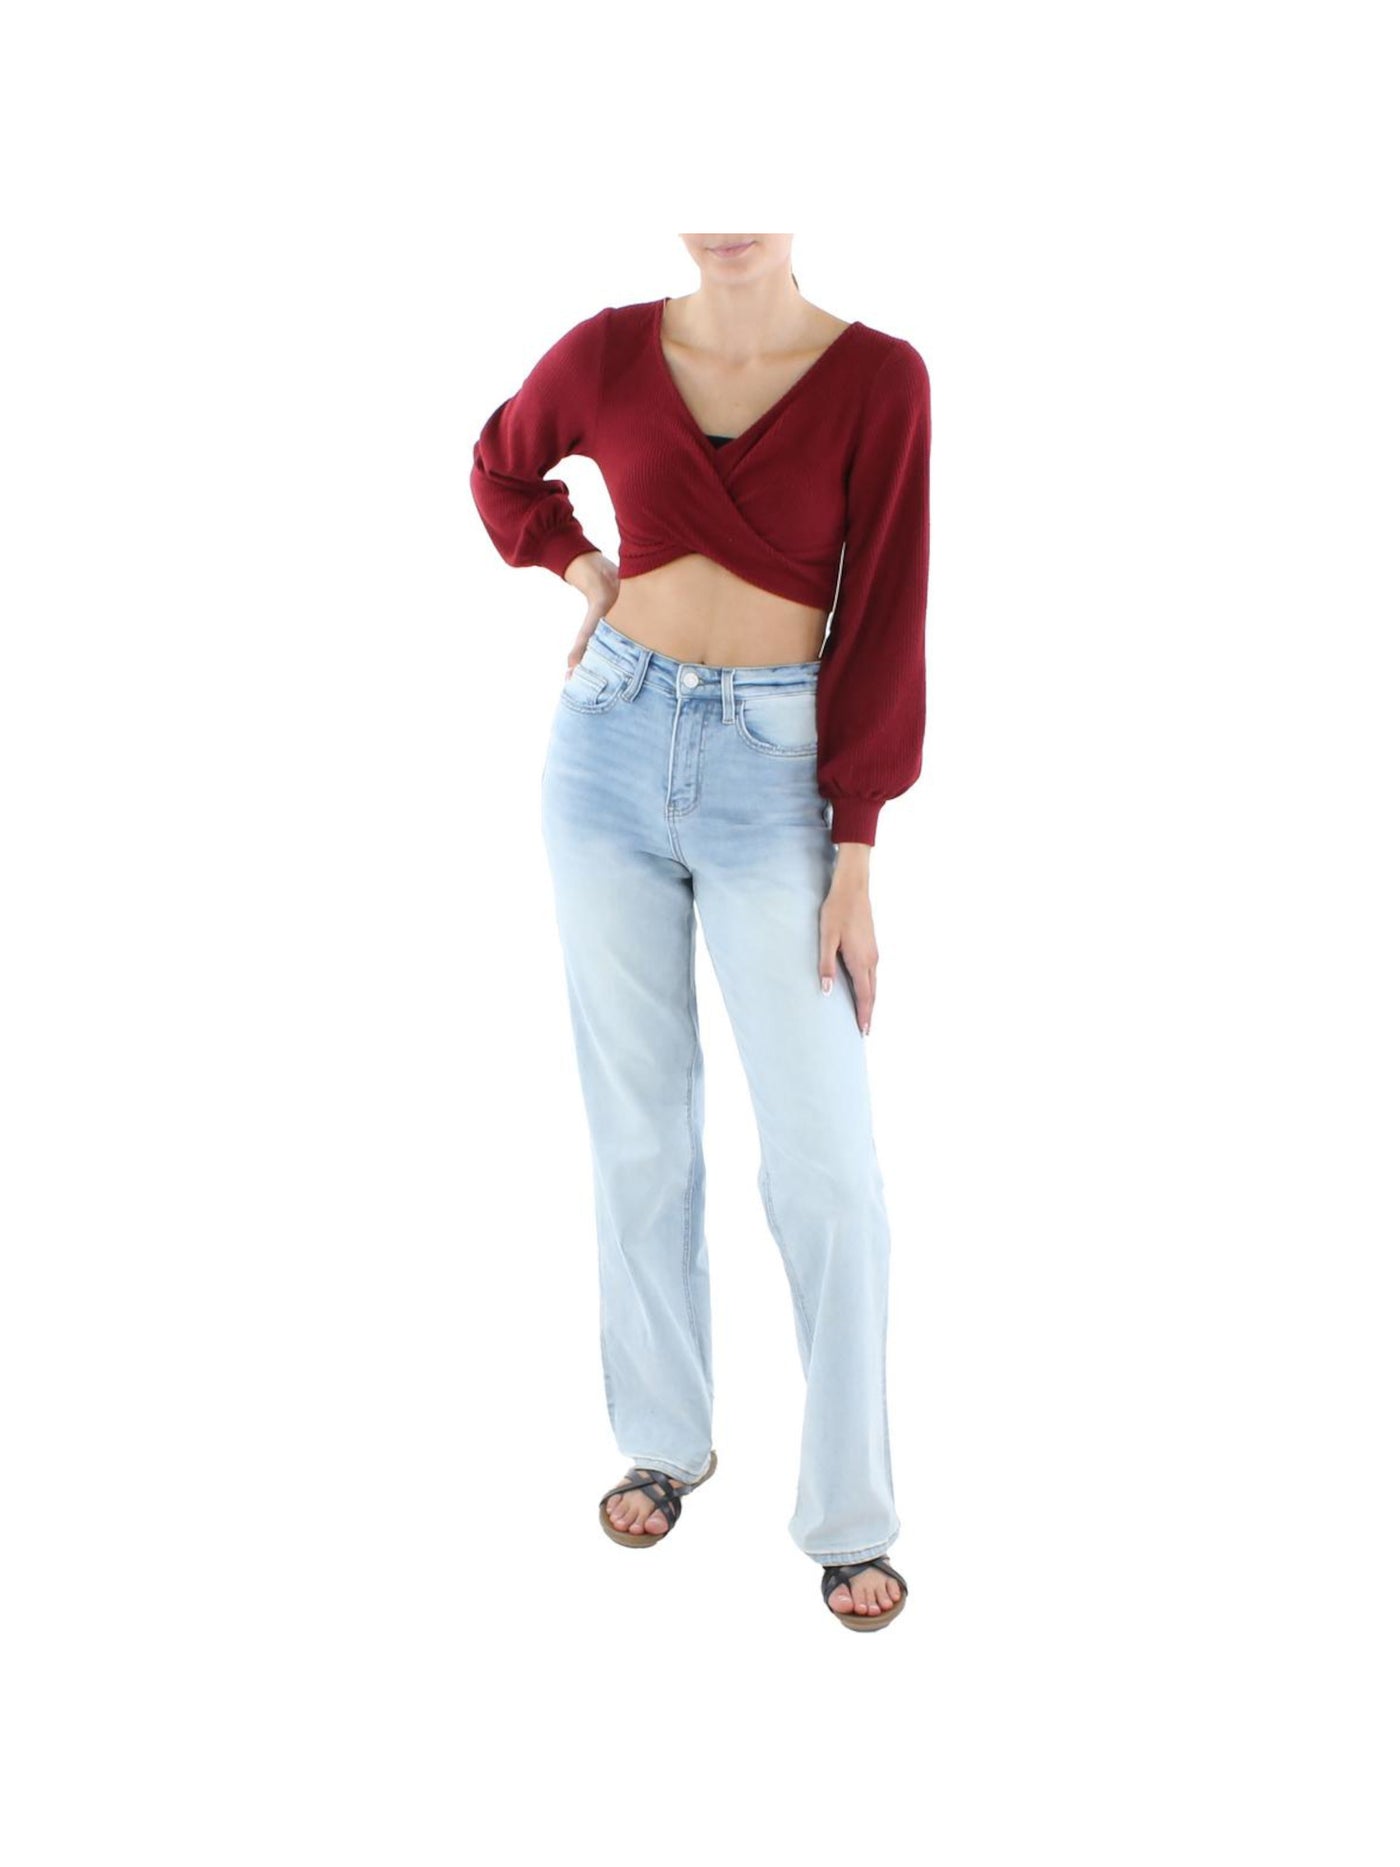 ALMOST FAMOUS Womens Red Ribbed Twist Front Long Sleeve V Neck Crop Top Sweater XL